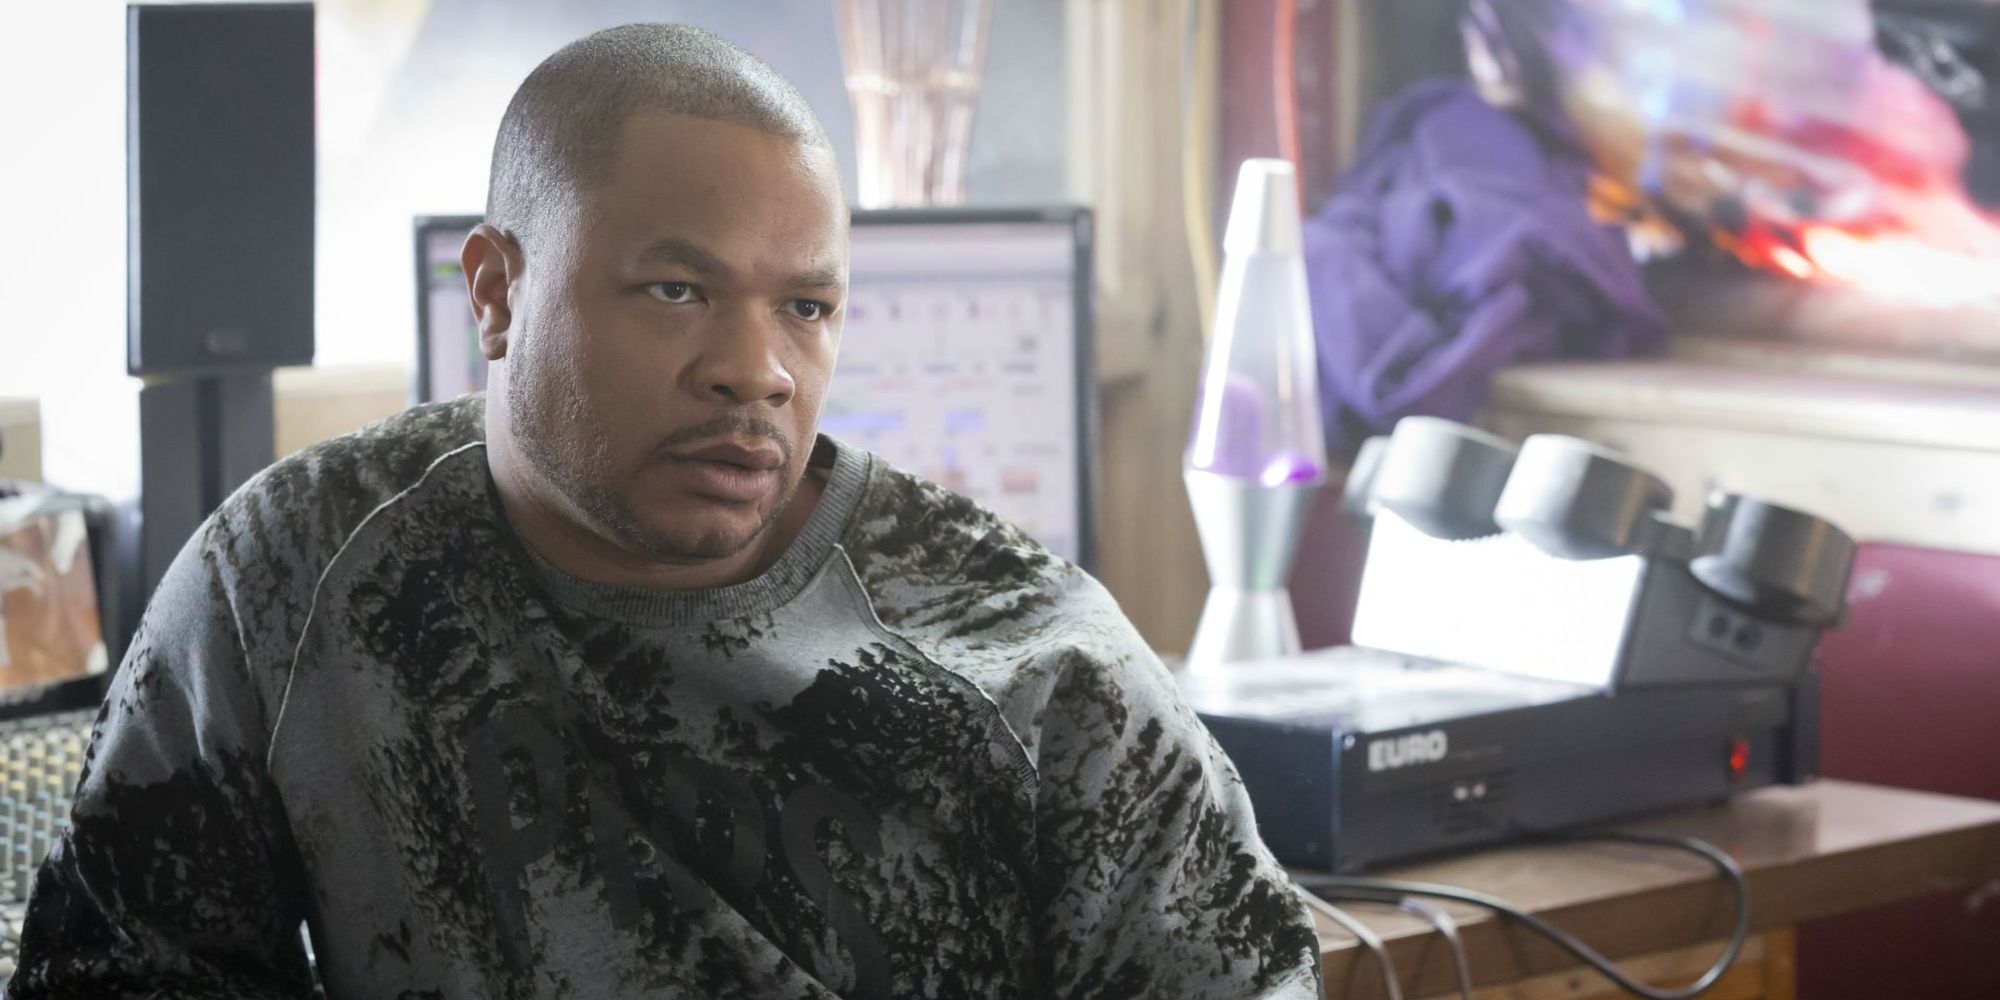 Empire Season 4 Episode 15 Saw Shynes Actions Catch Up To Him